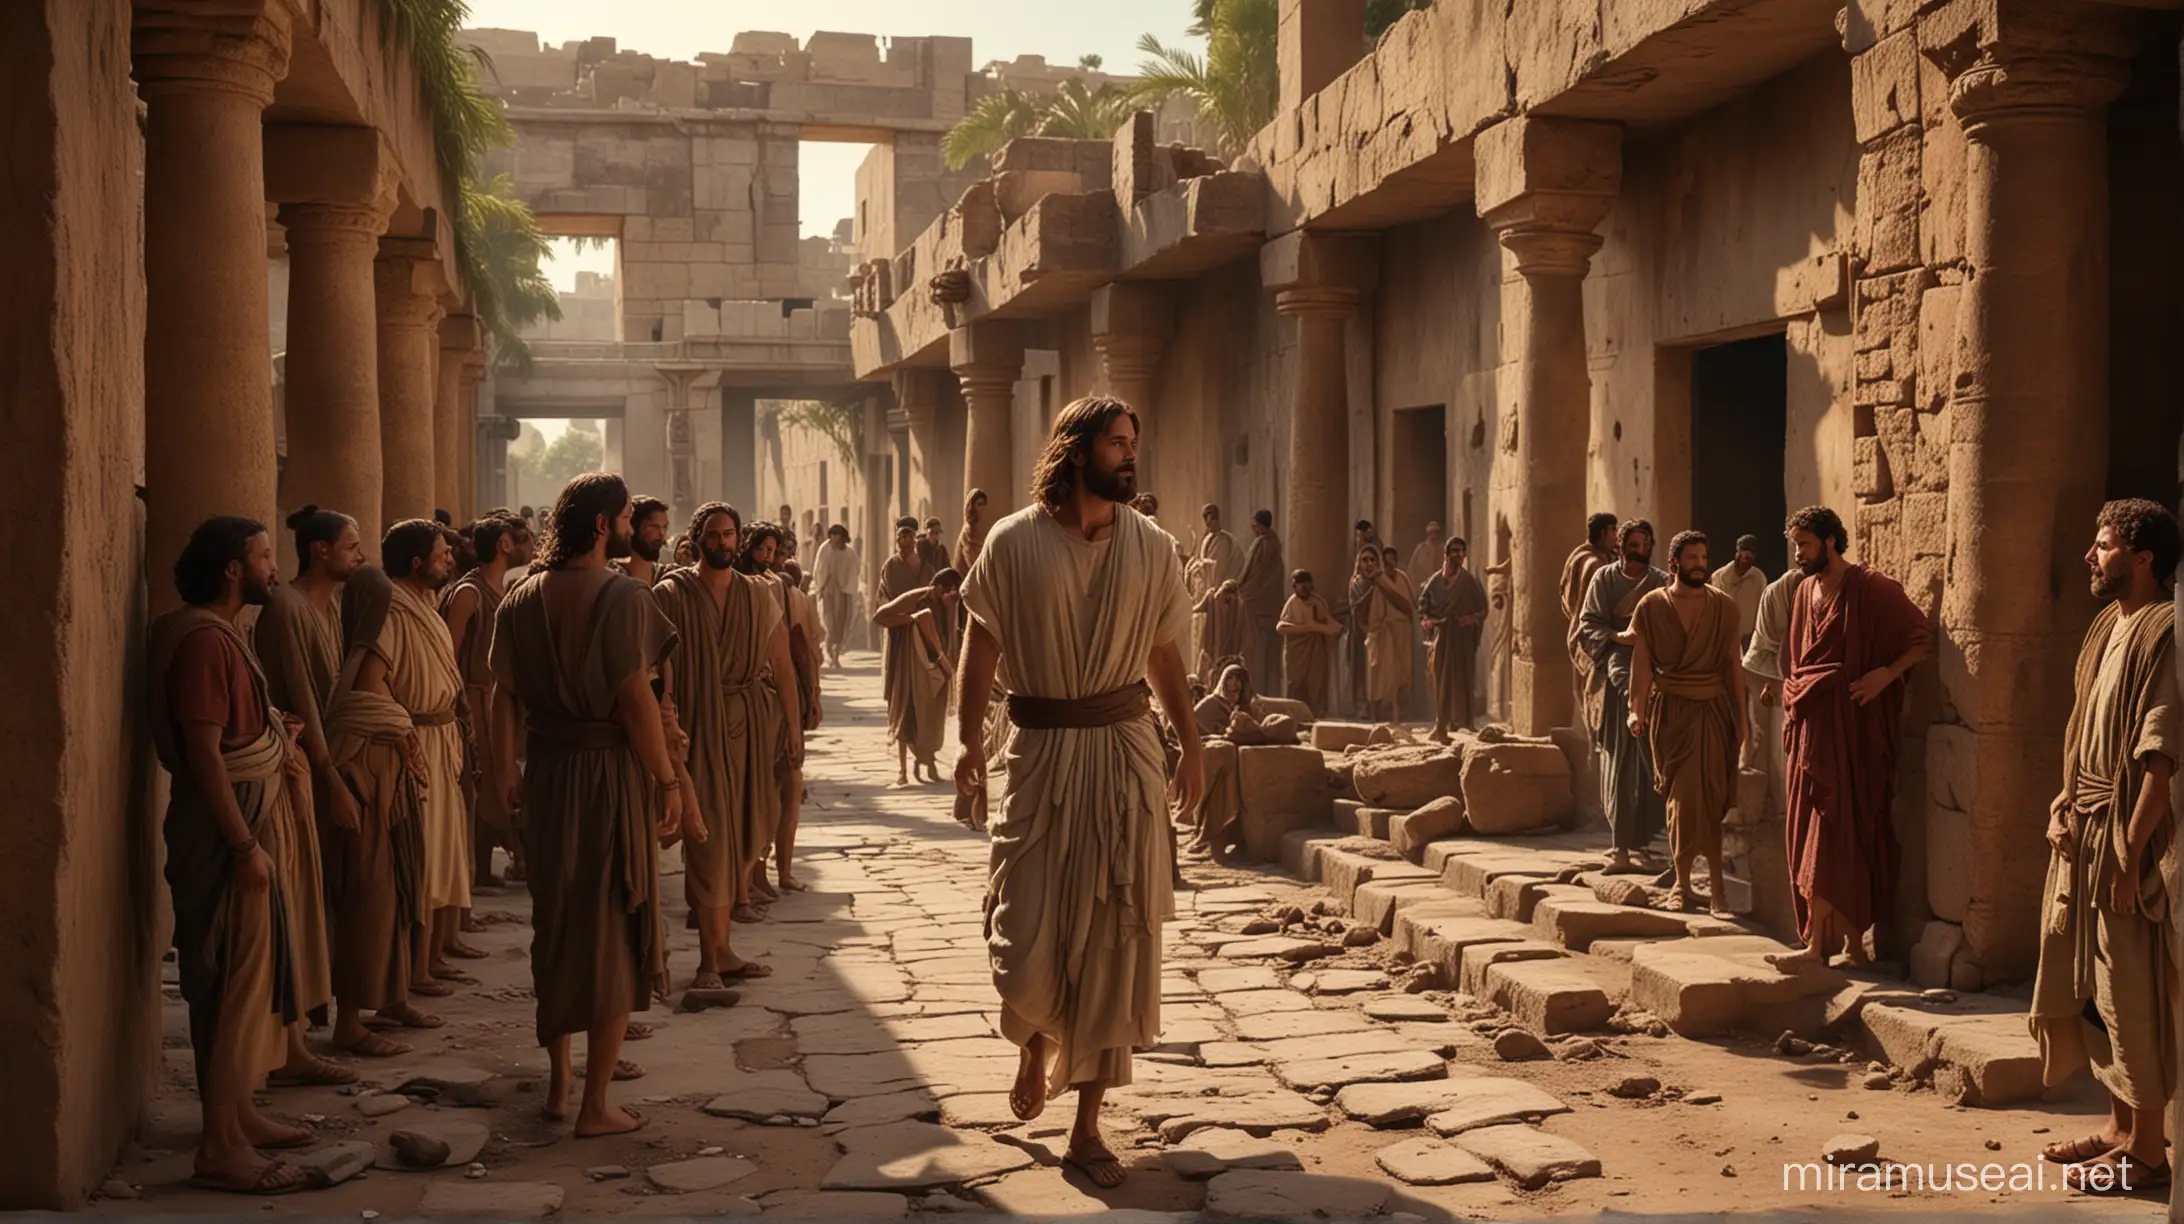 Jesus and Followers in 1st Century Capernaum House Scene from The Passion of the Christ